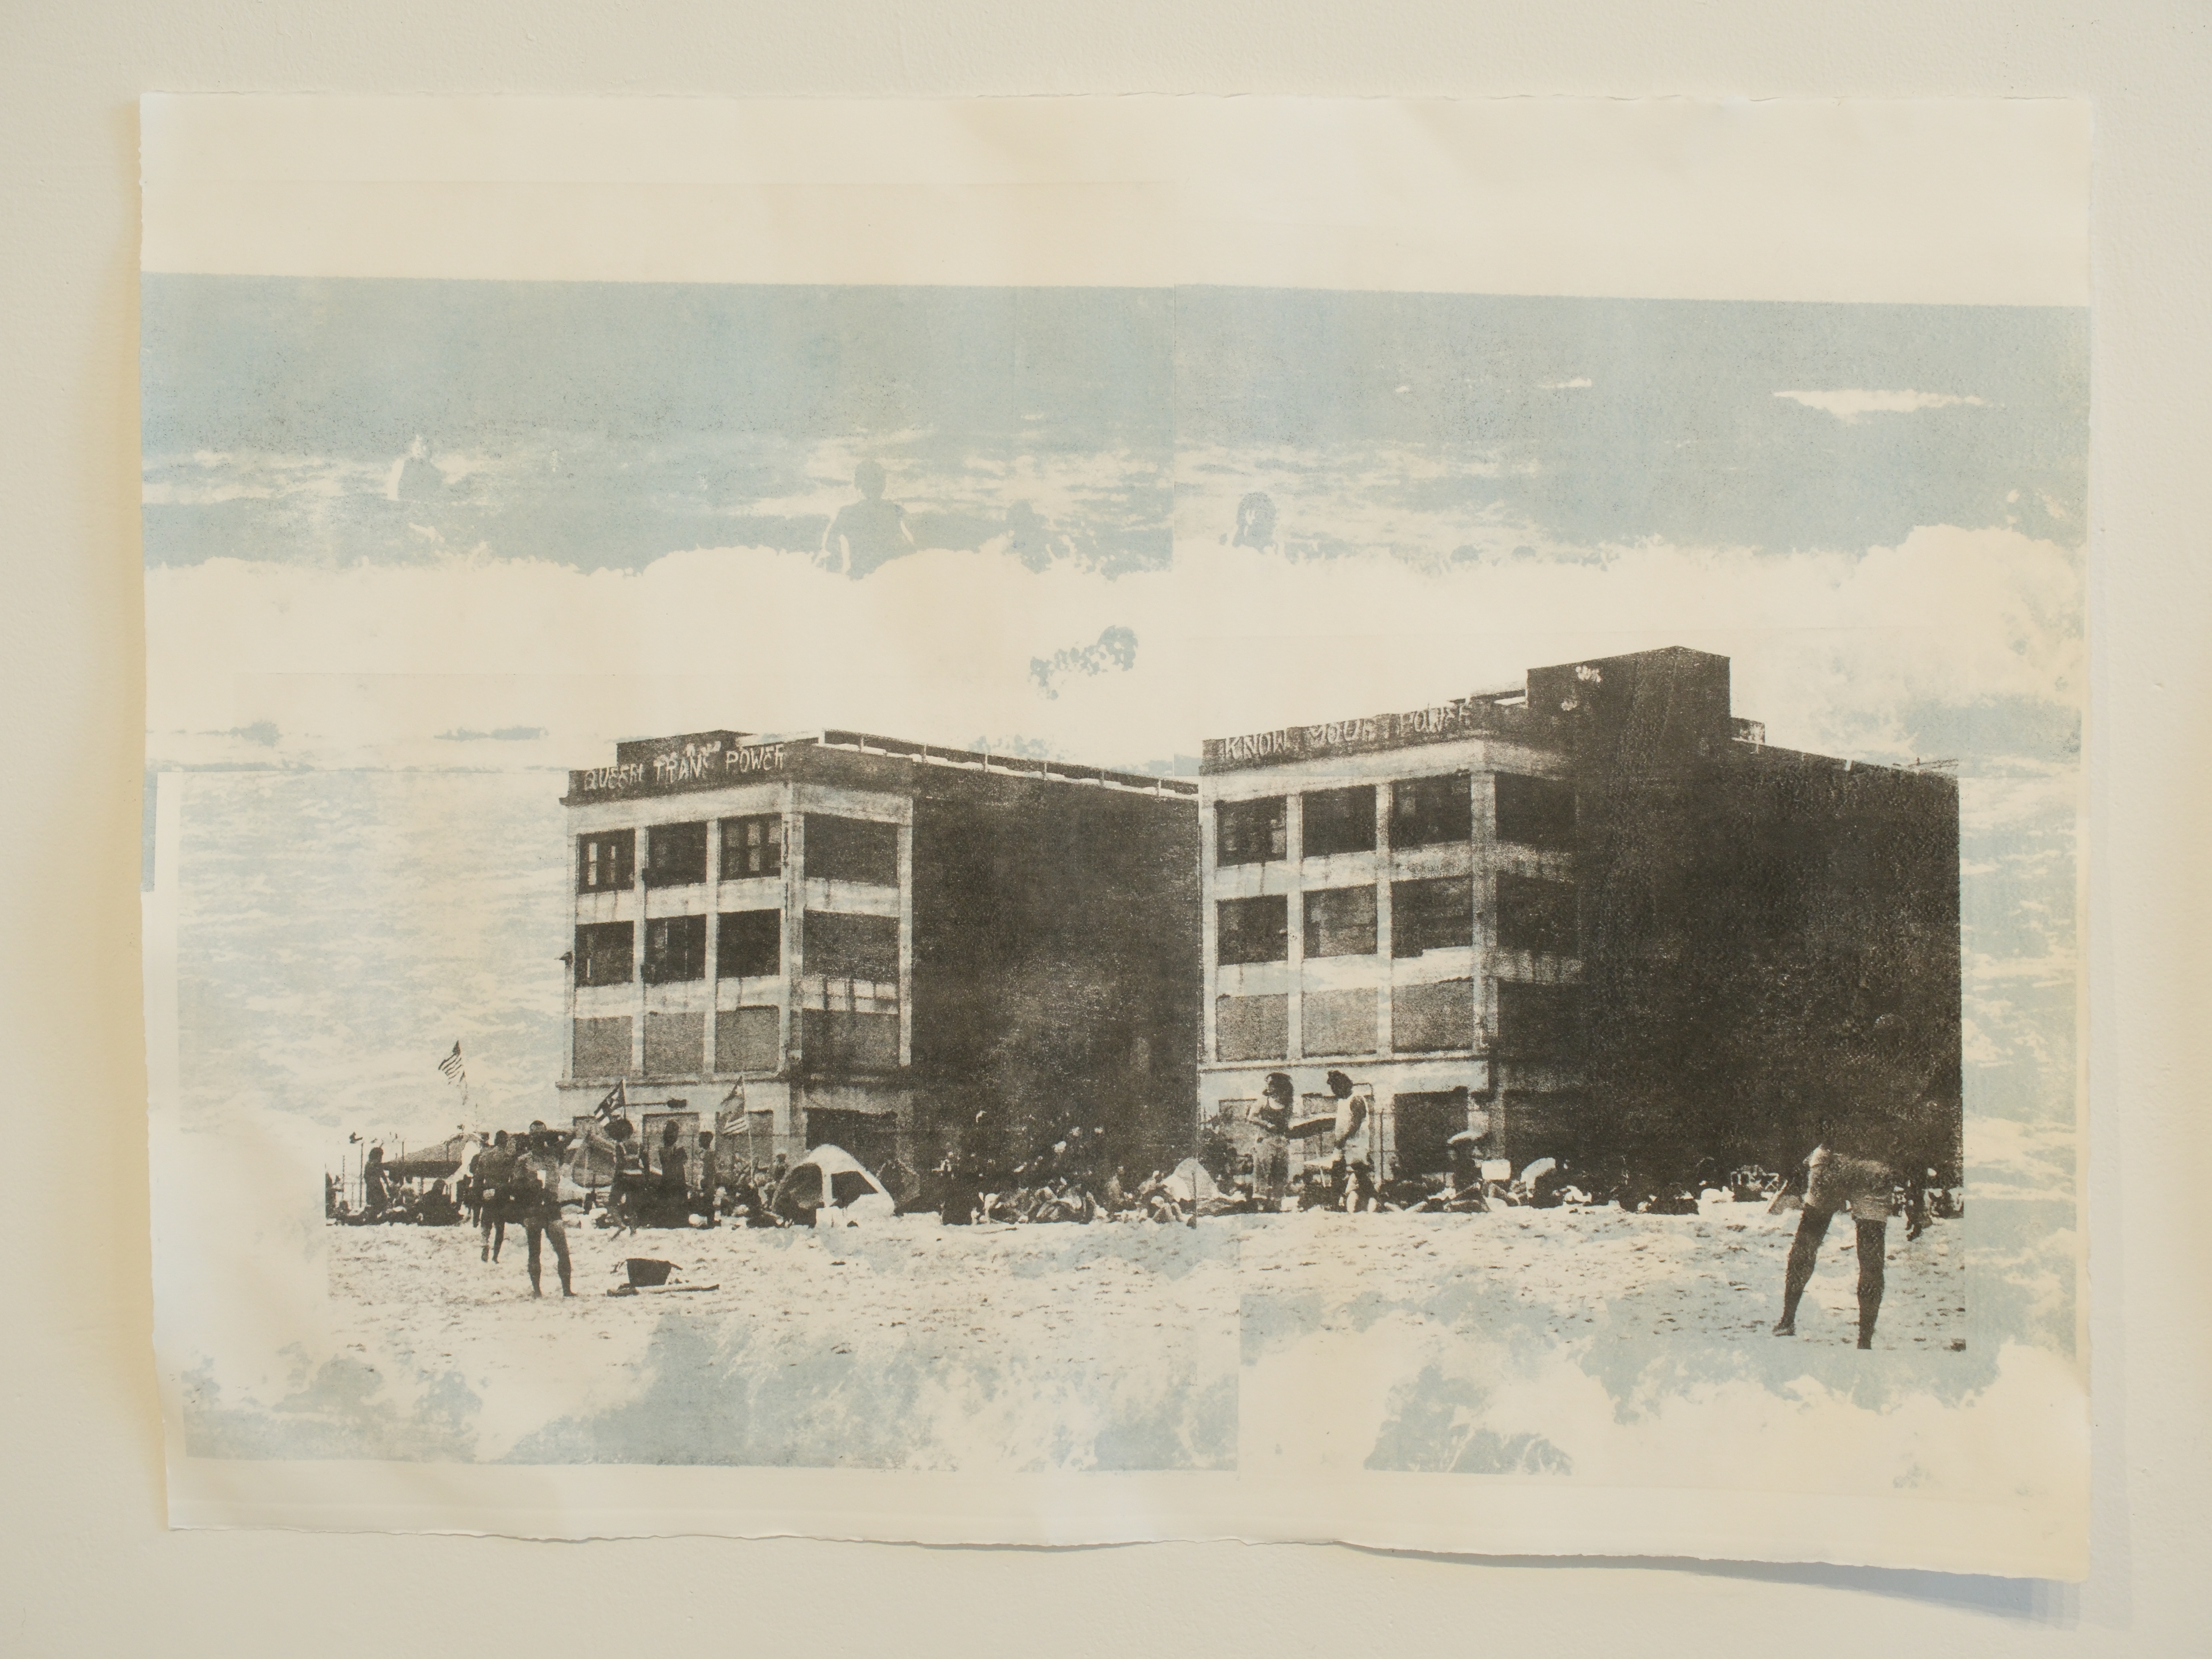 Beach goers below an abandoned graffiti covered buildings in black ink layered with people playing in ocean surf in blue-grey